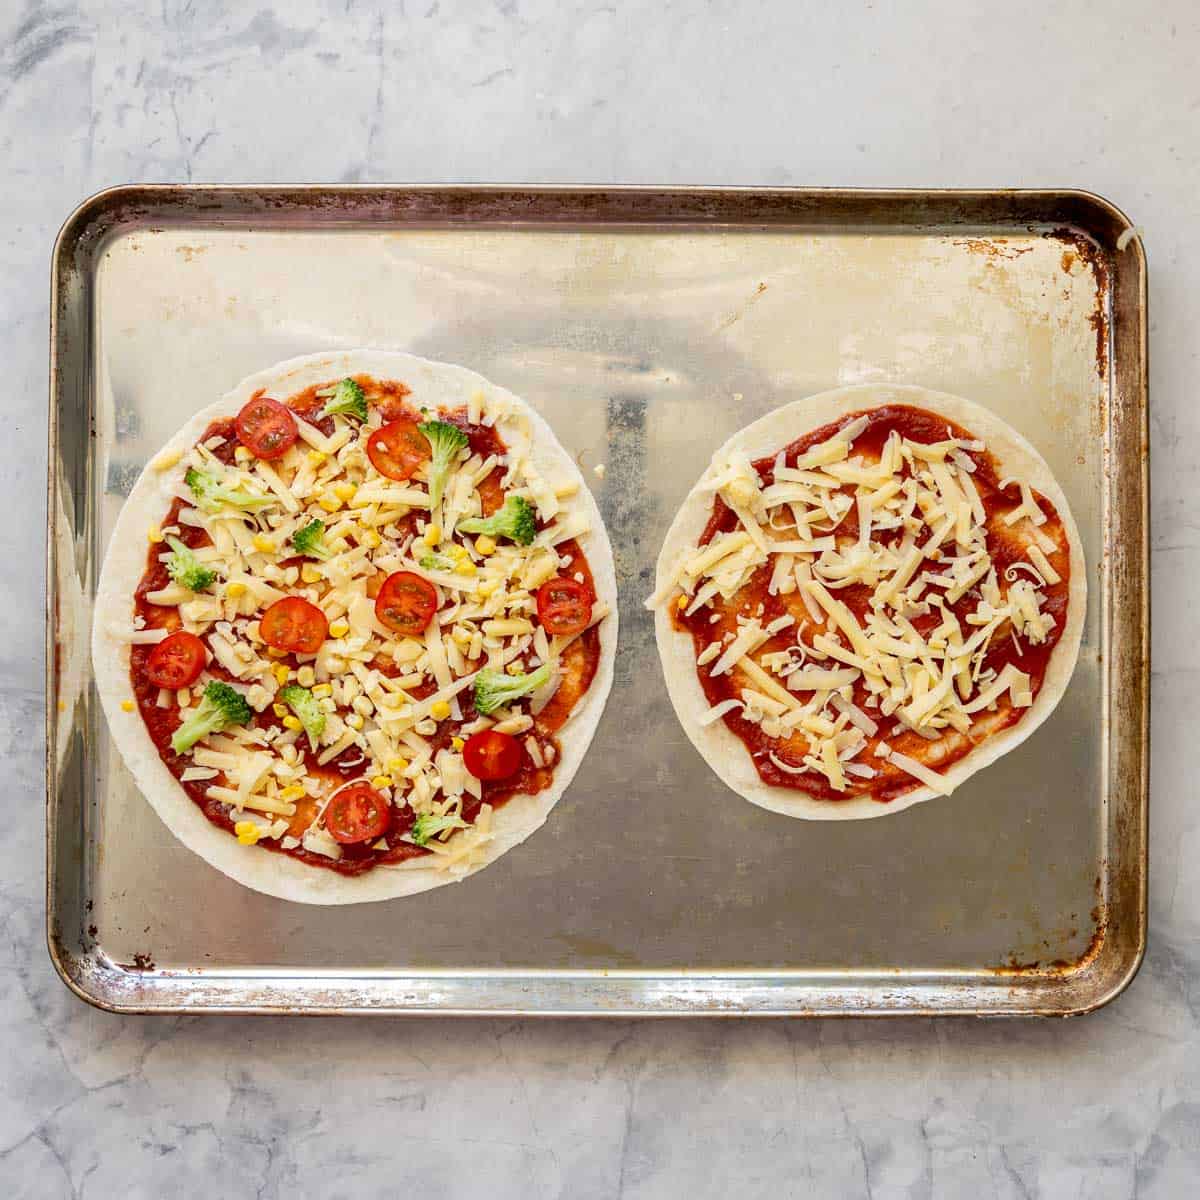 Two tortillas on a baking tray,  spread with pizza sauce and toppings and cheese